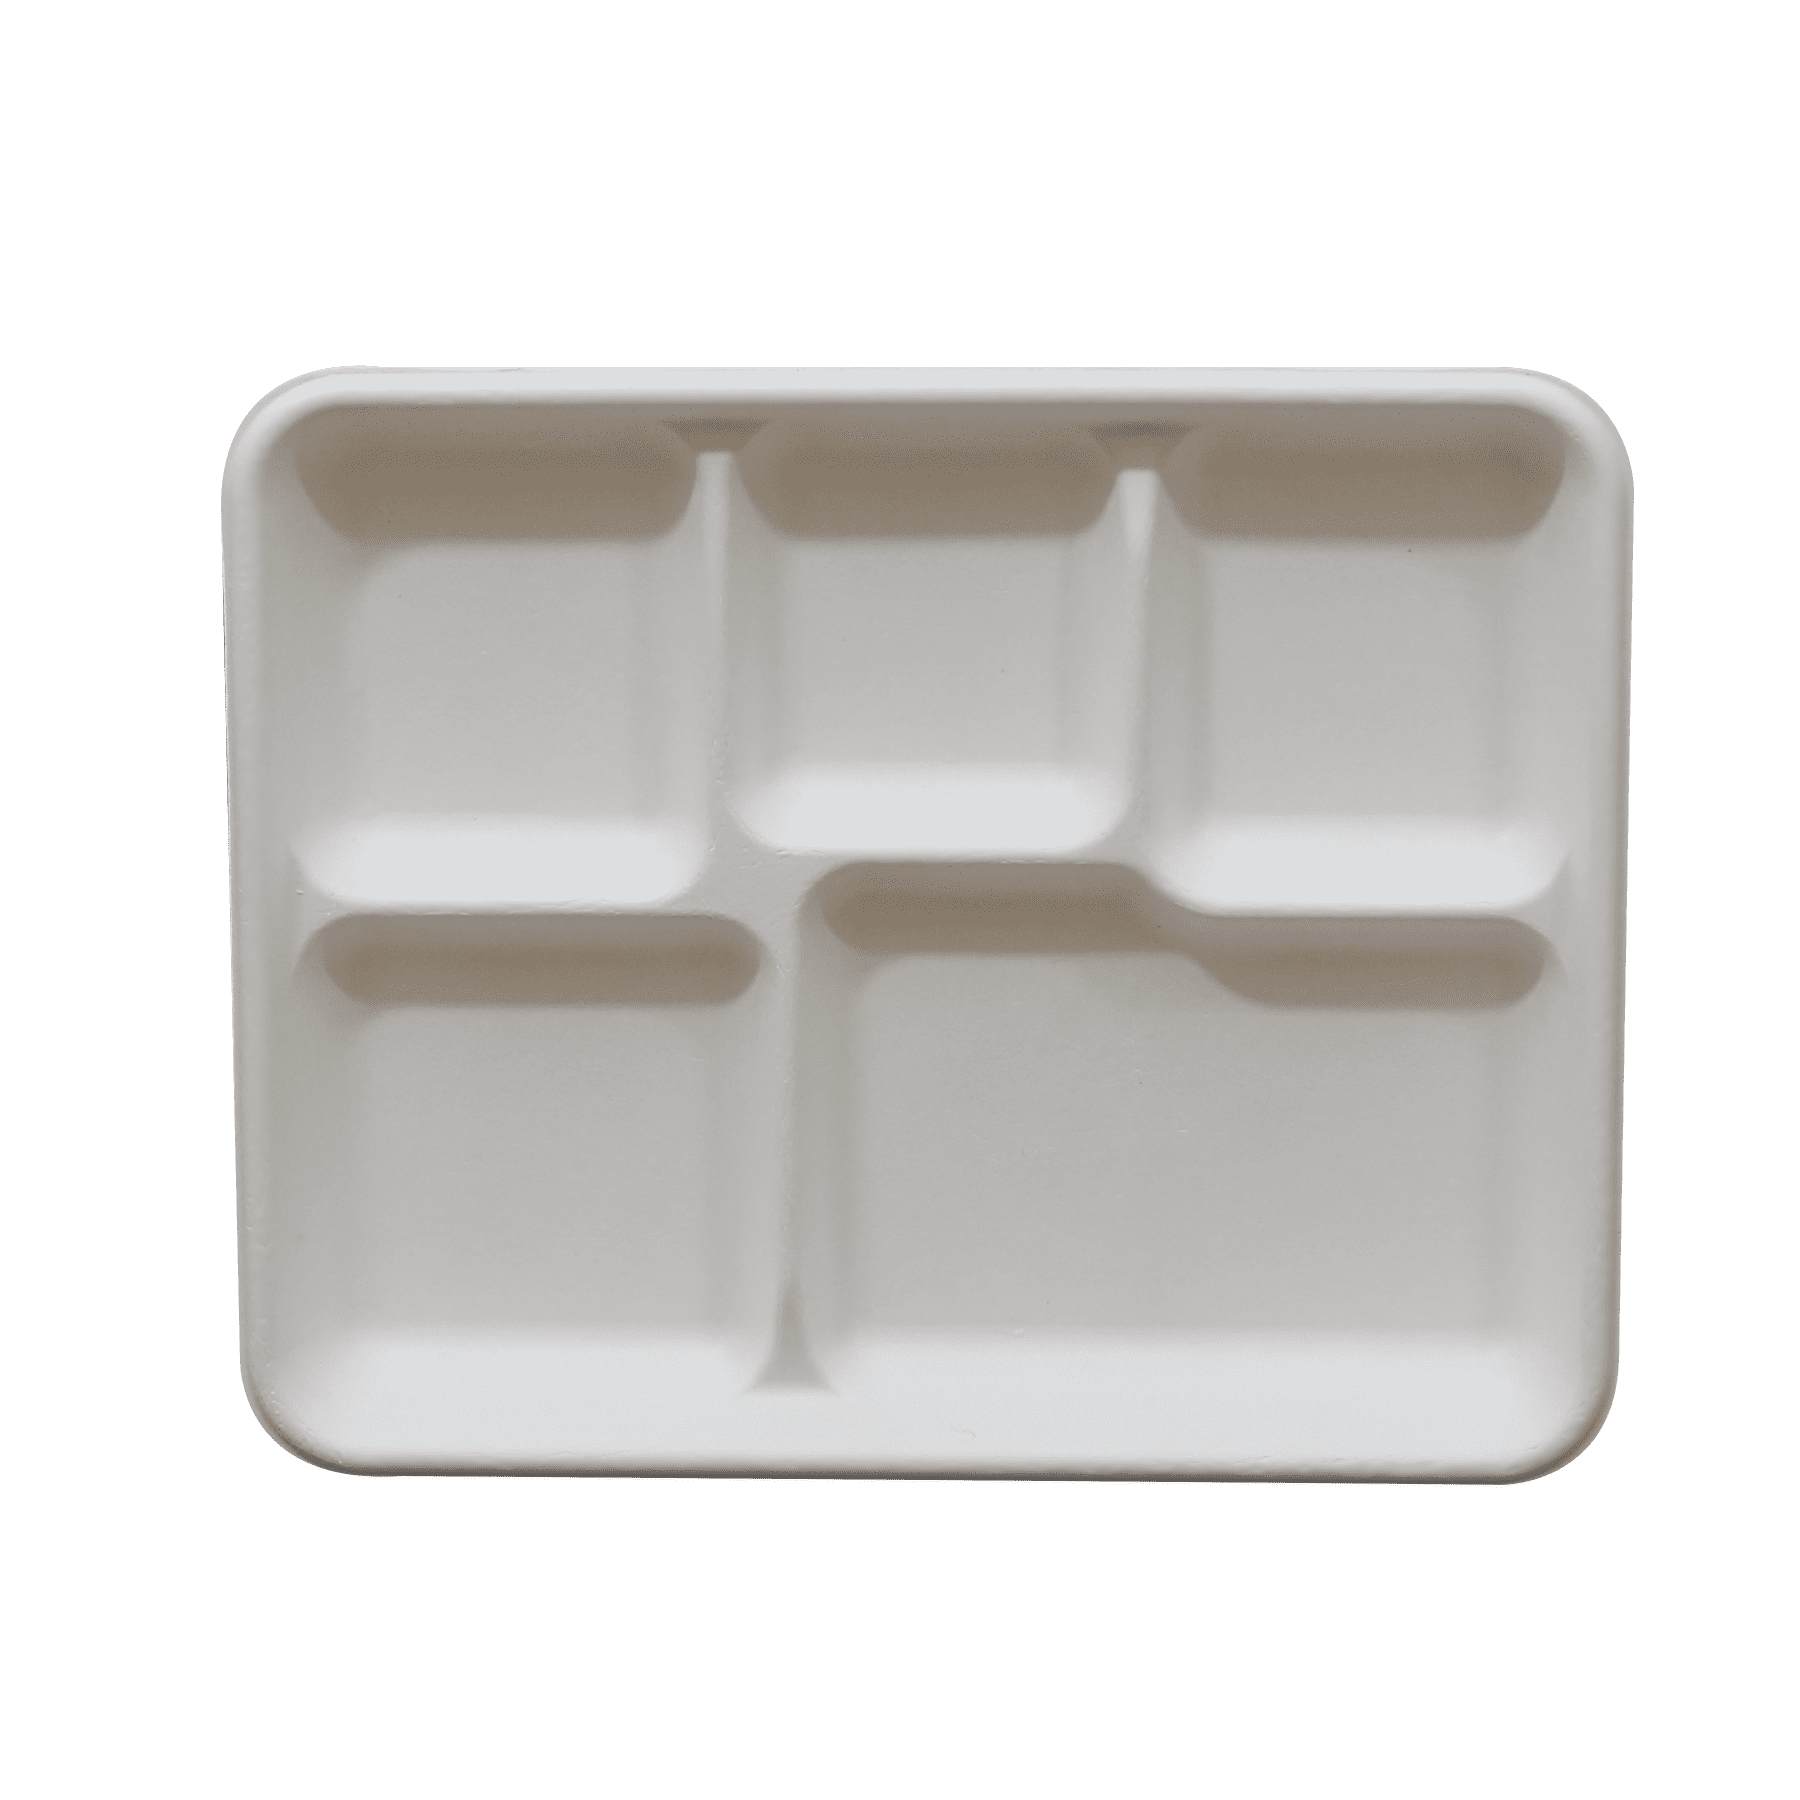 Schools ditch plastic lunch trays in favor of compostable plates